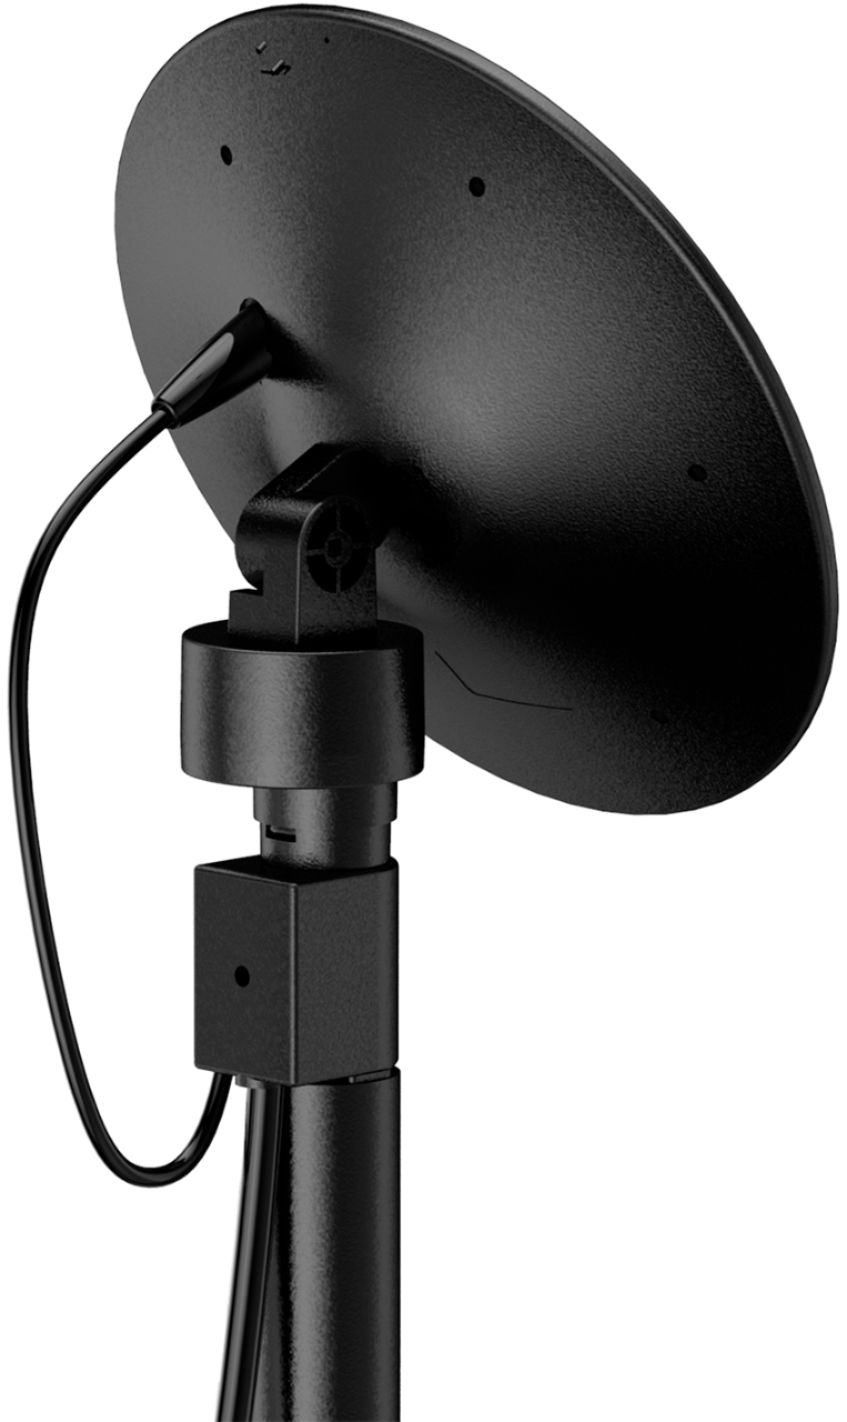 Left View: Core Innovations - Amplified HDTV Outdoor/Attic Antenna 100Mile Range Motorized - Black